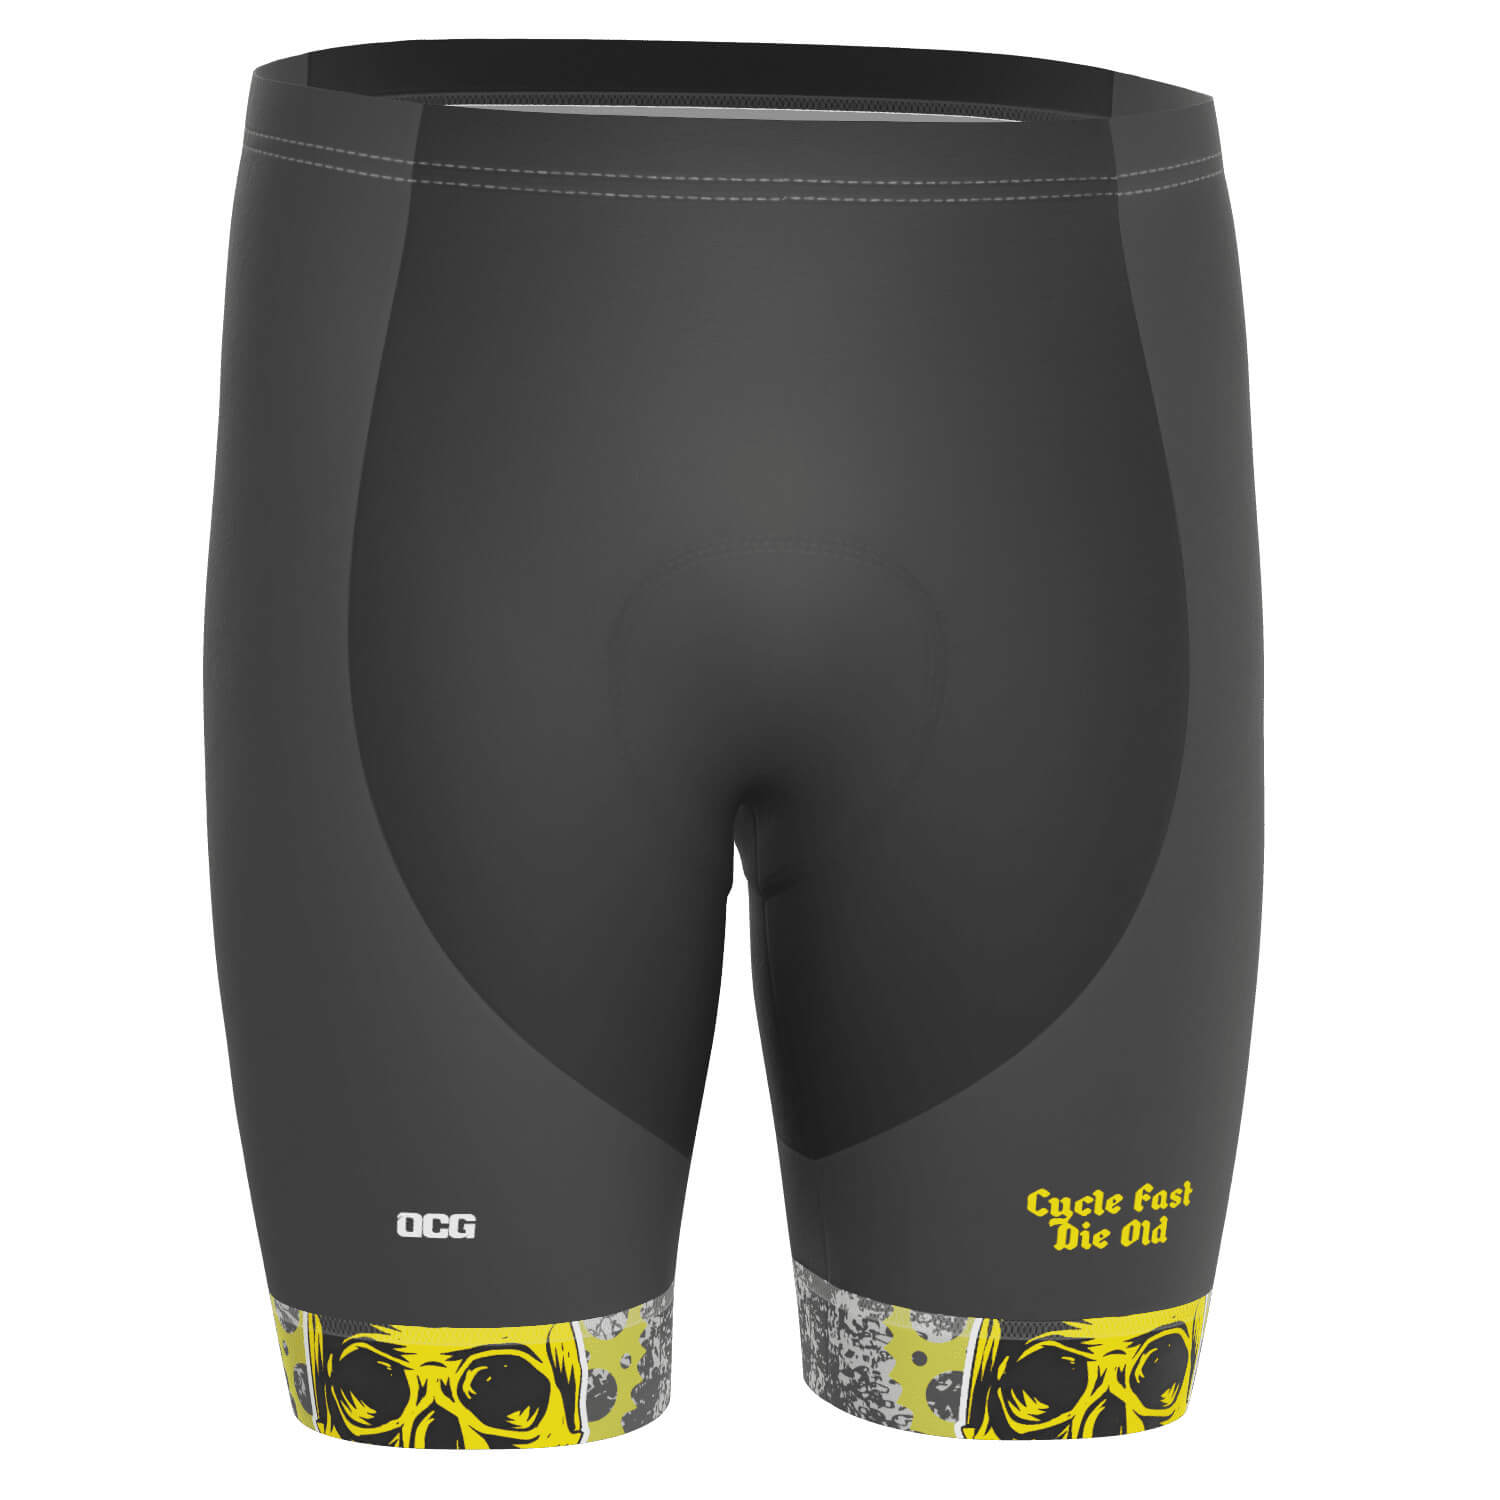 Men's Cycle Fast Die Old Gel Padded Cycling Shorts